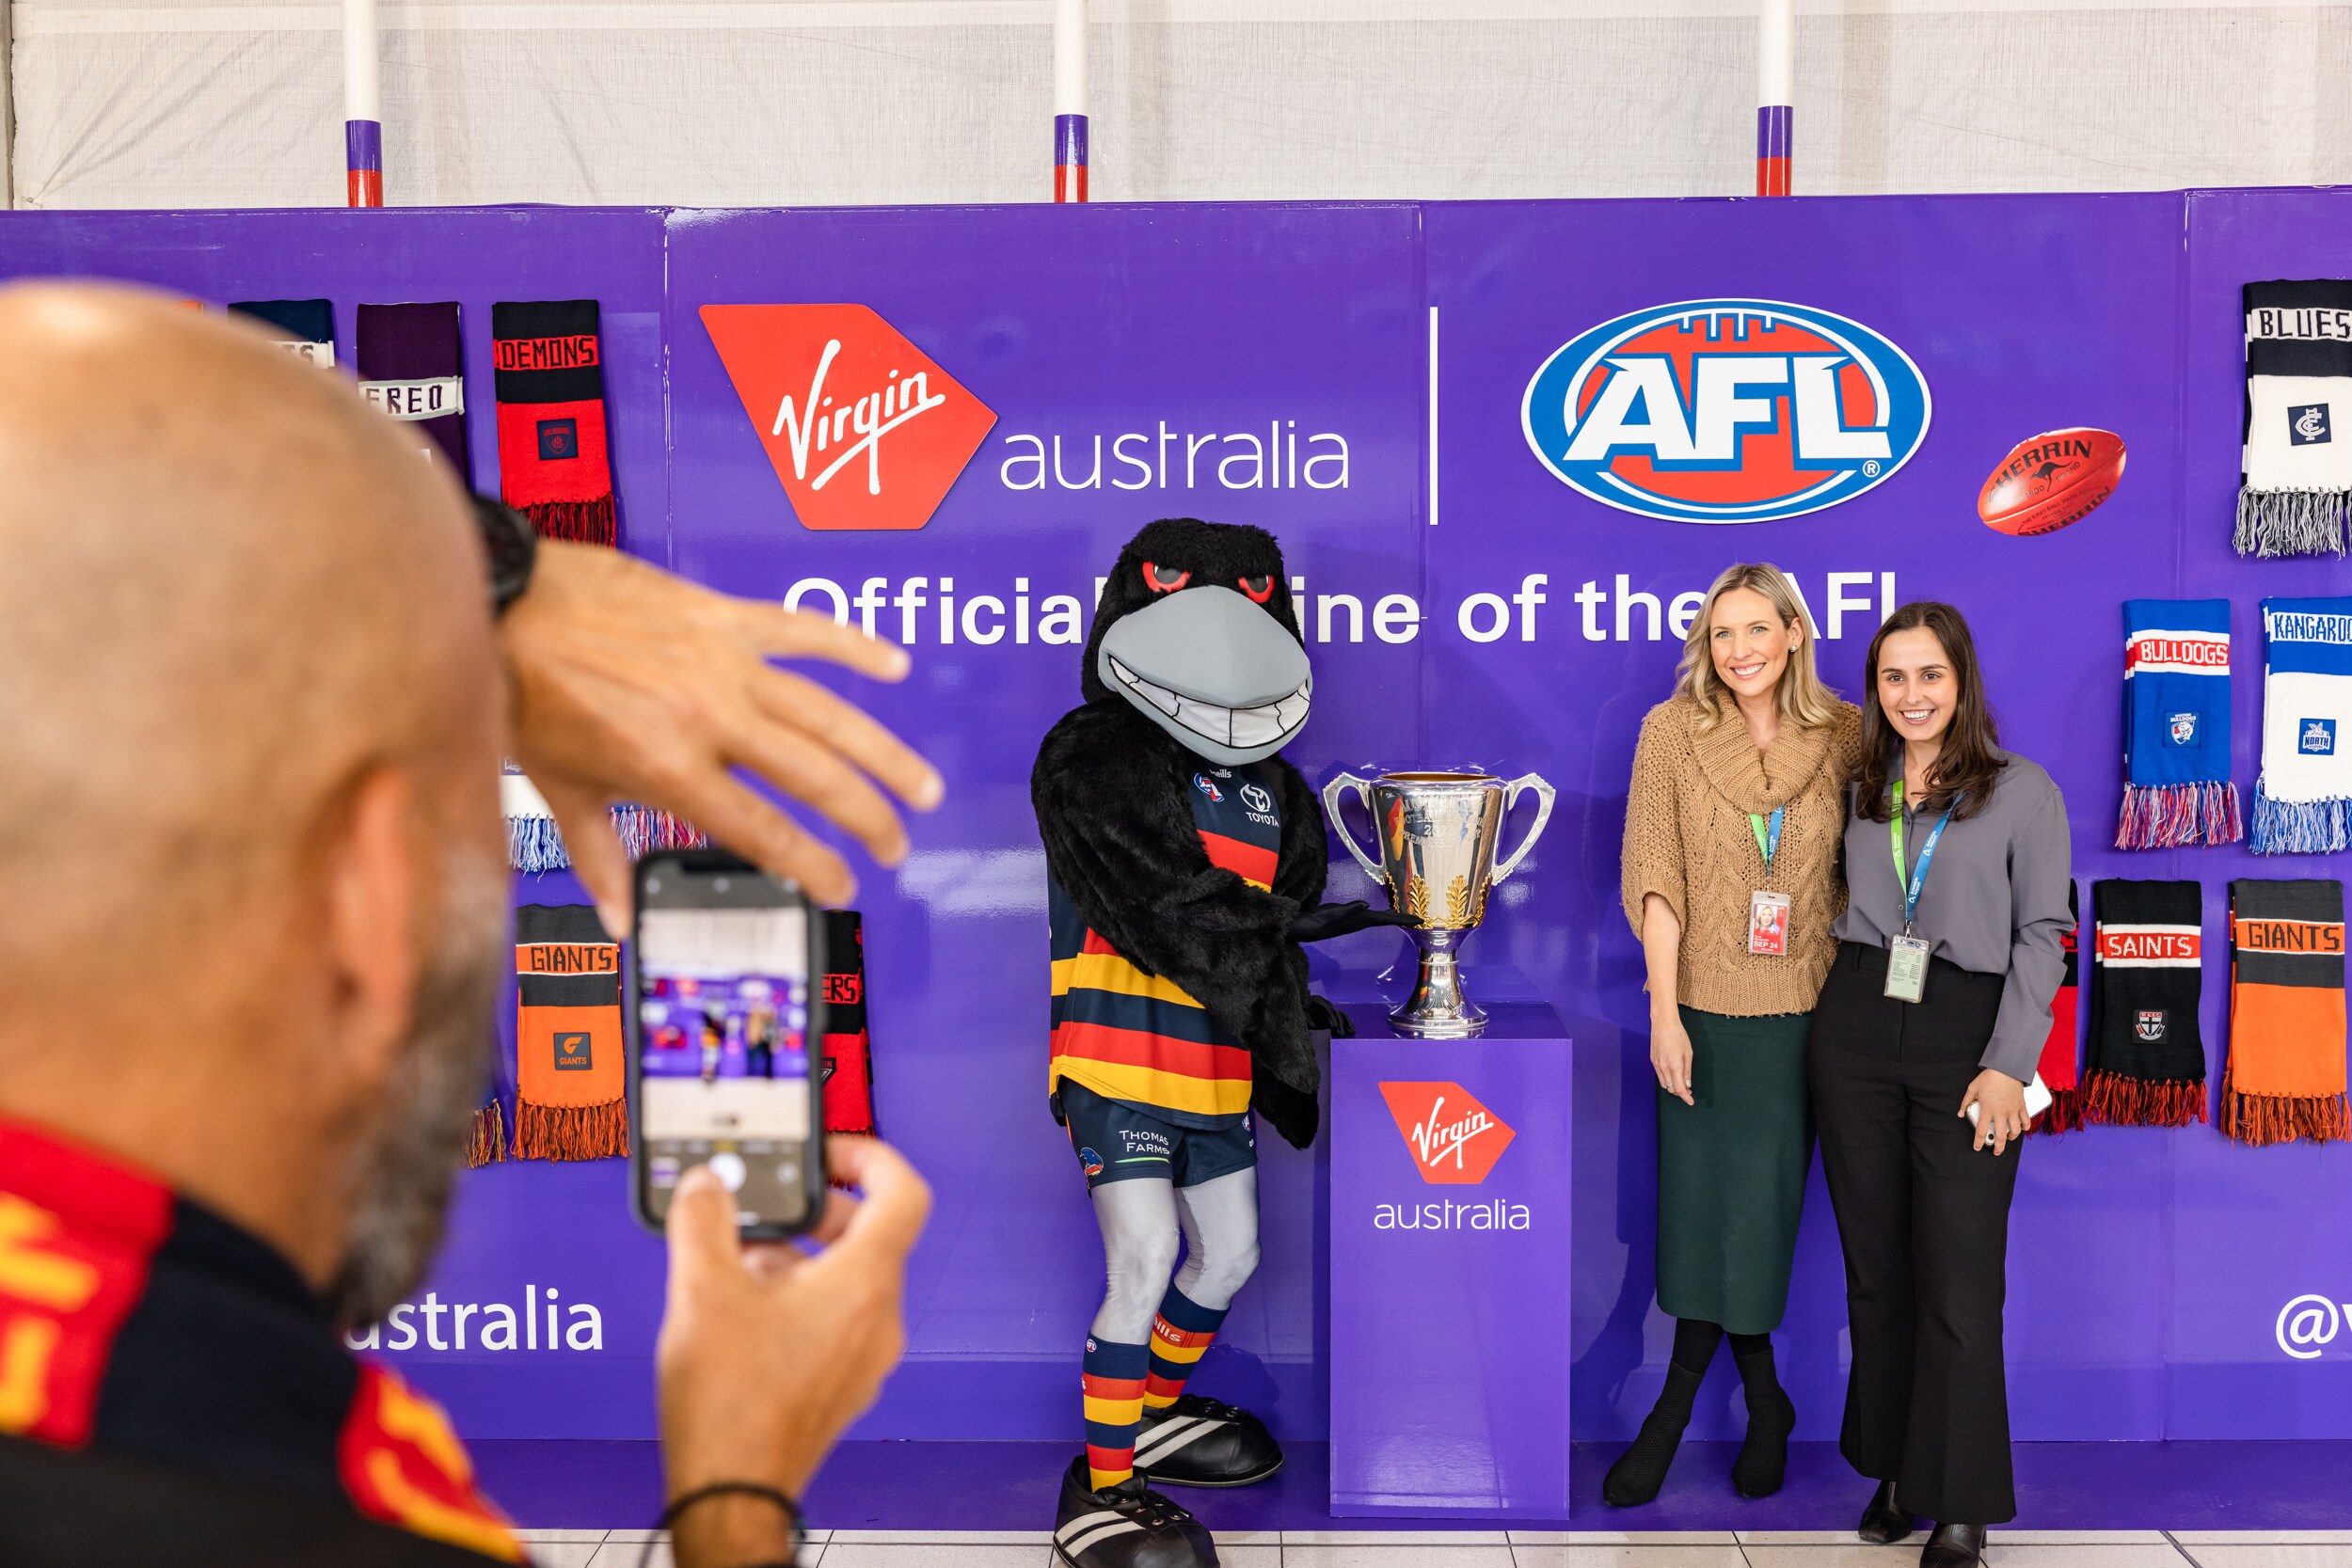 Adelaide Crows fans standing proudly next to the AFL Grand Final trophy